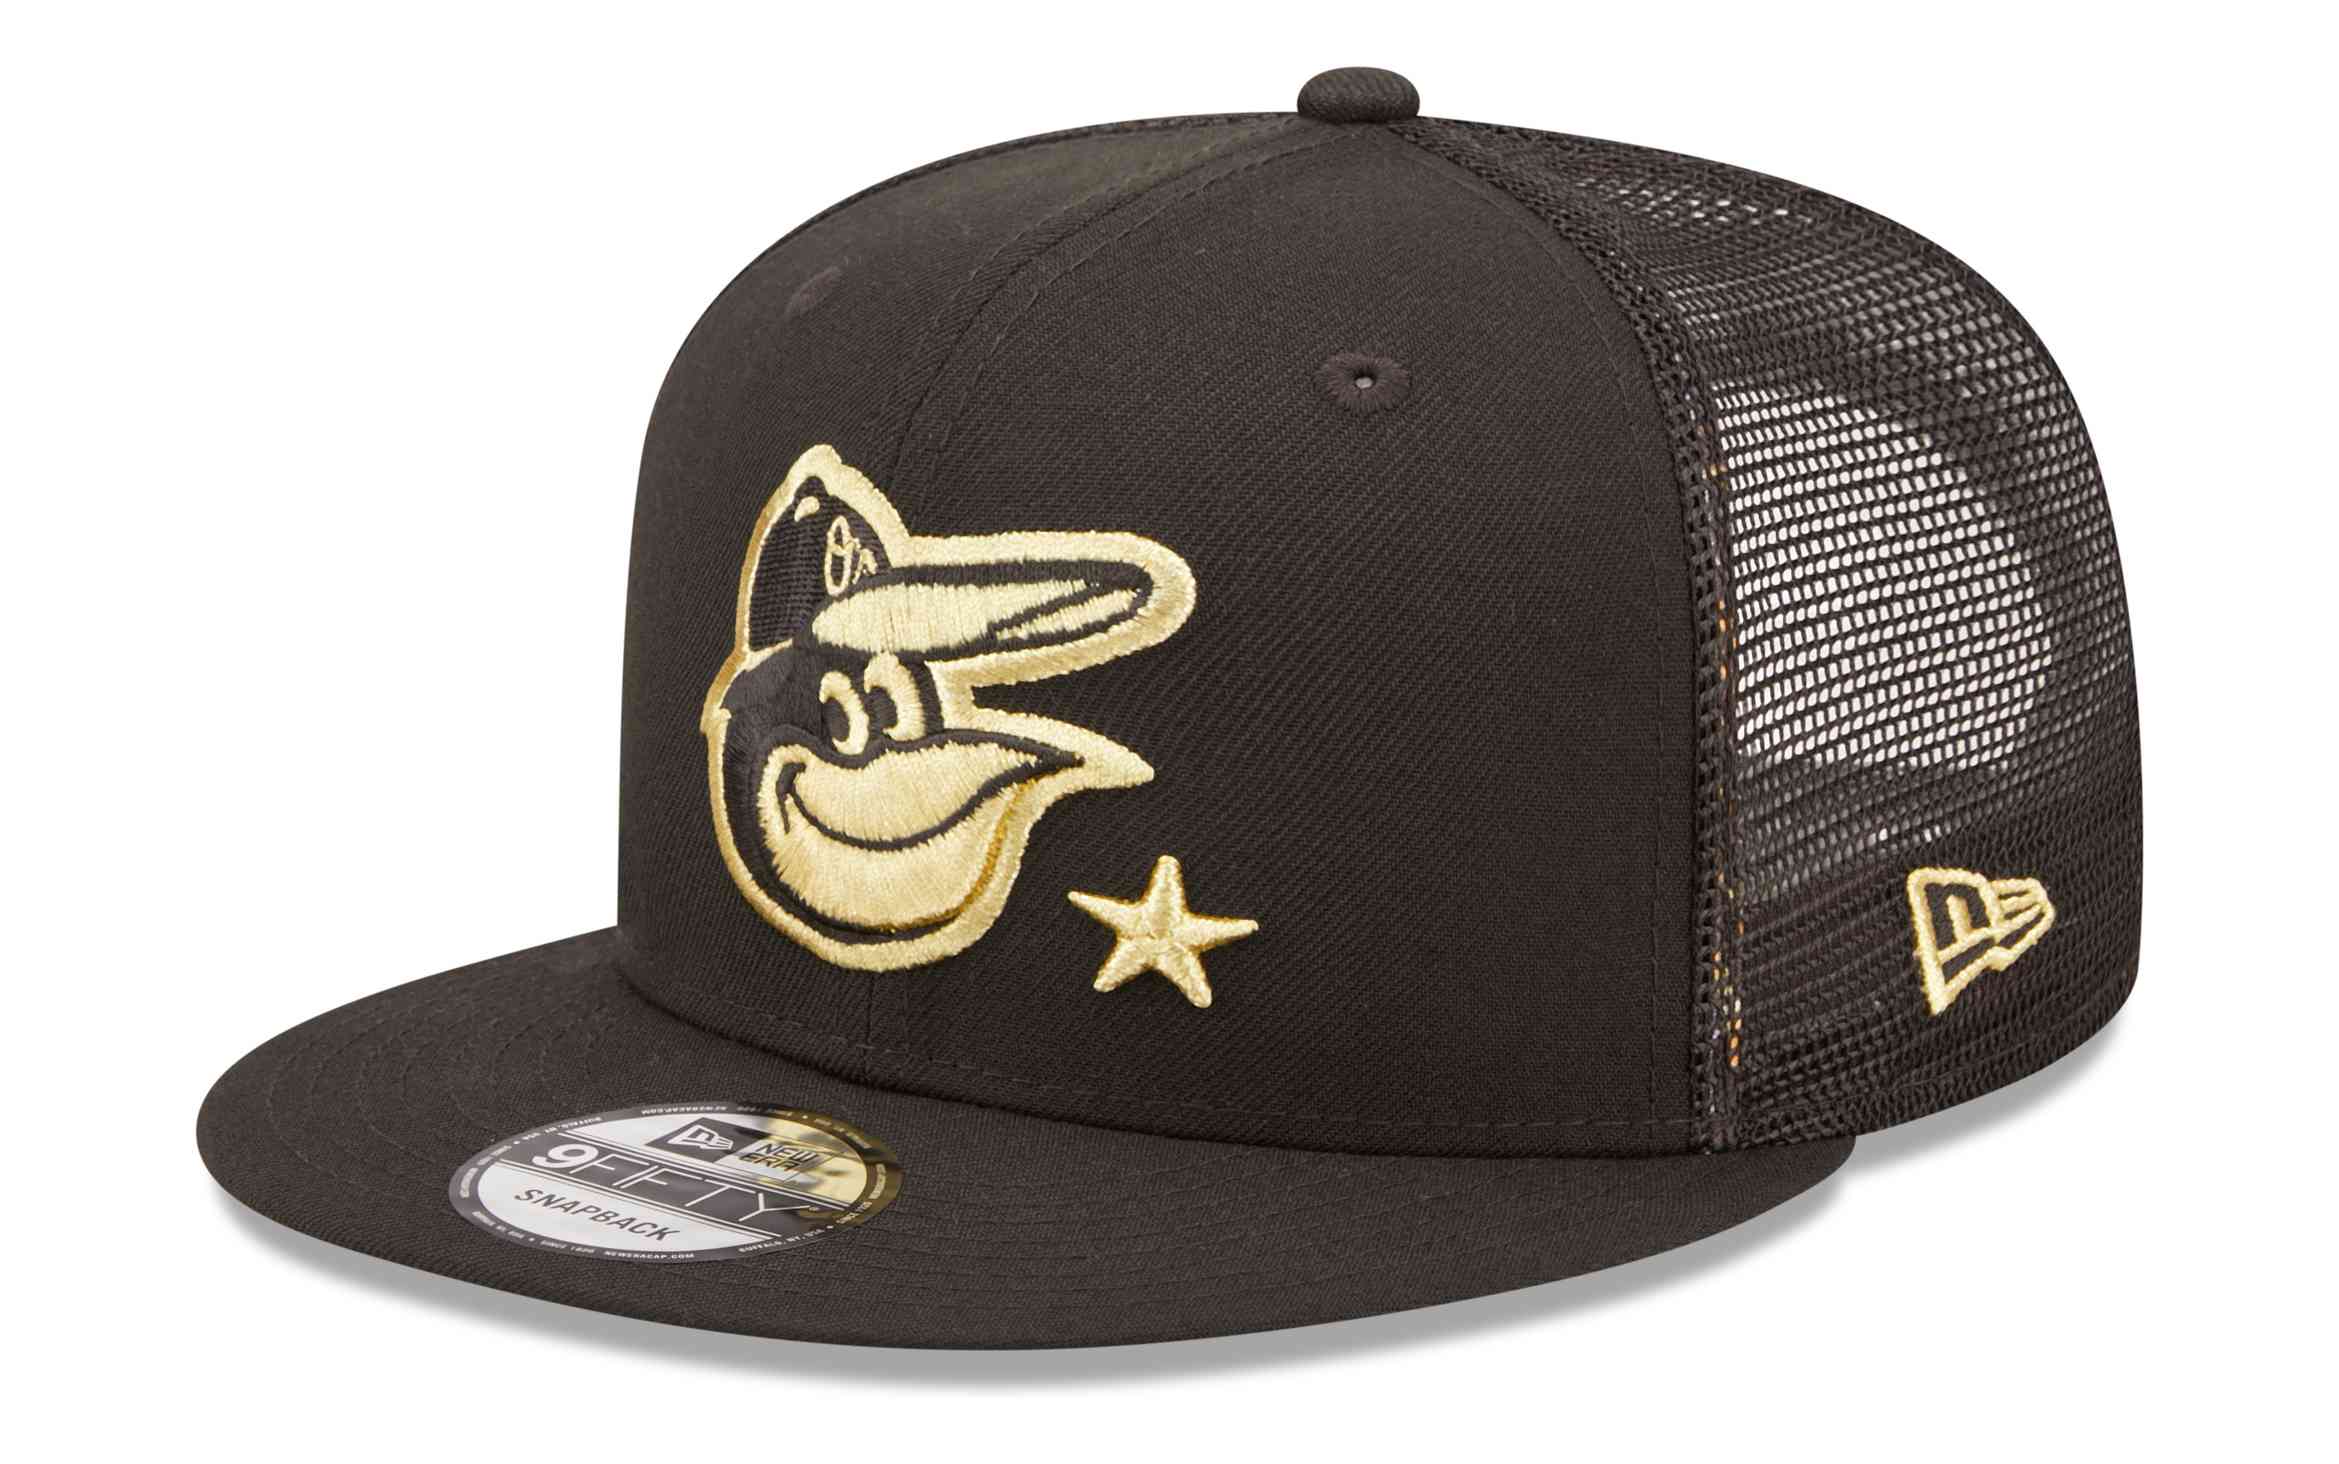 New Era - MLB Baltimore Orioles All Star Game Patch 9Fifty